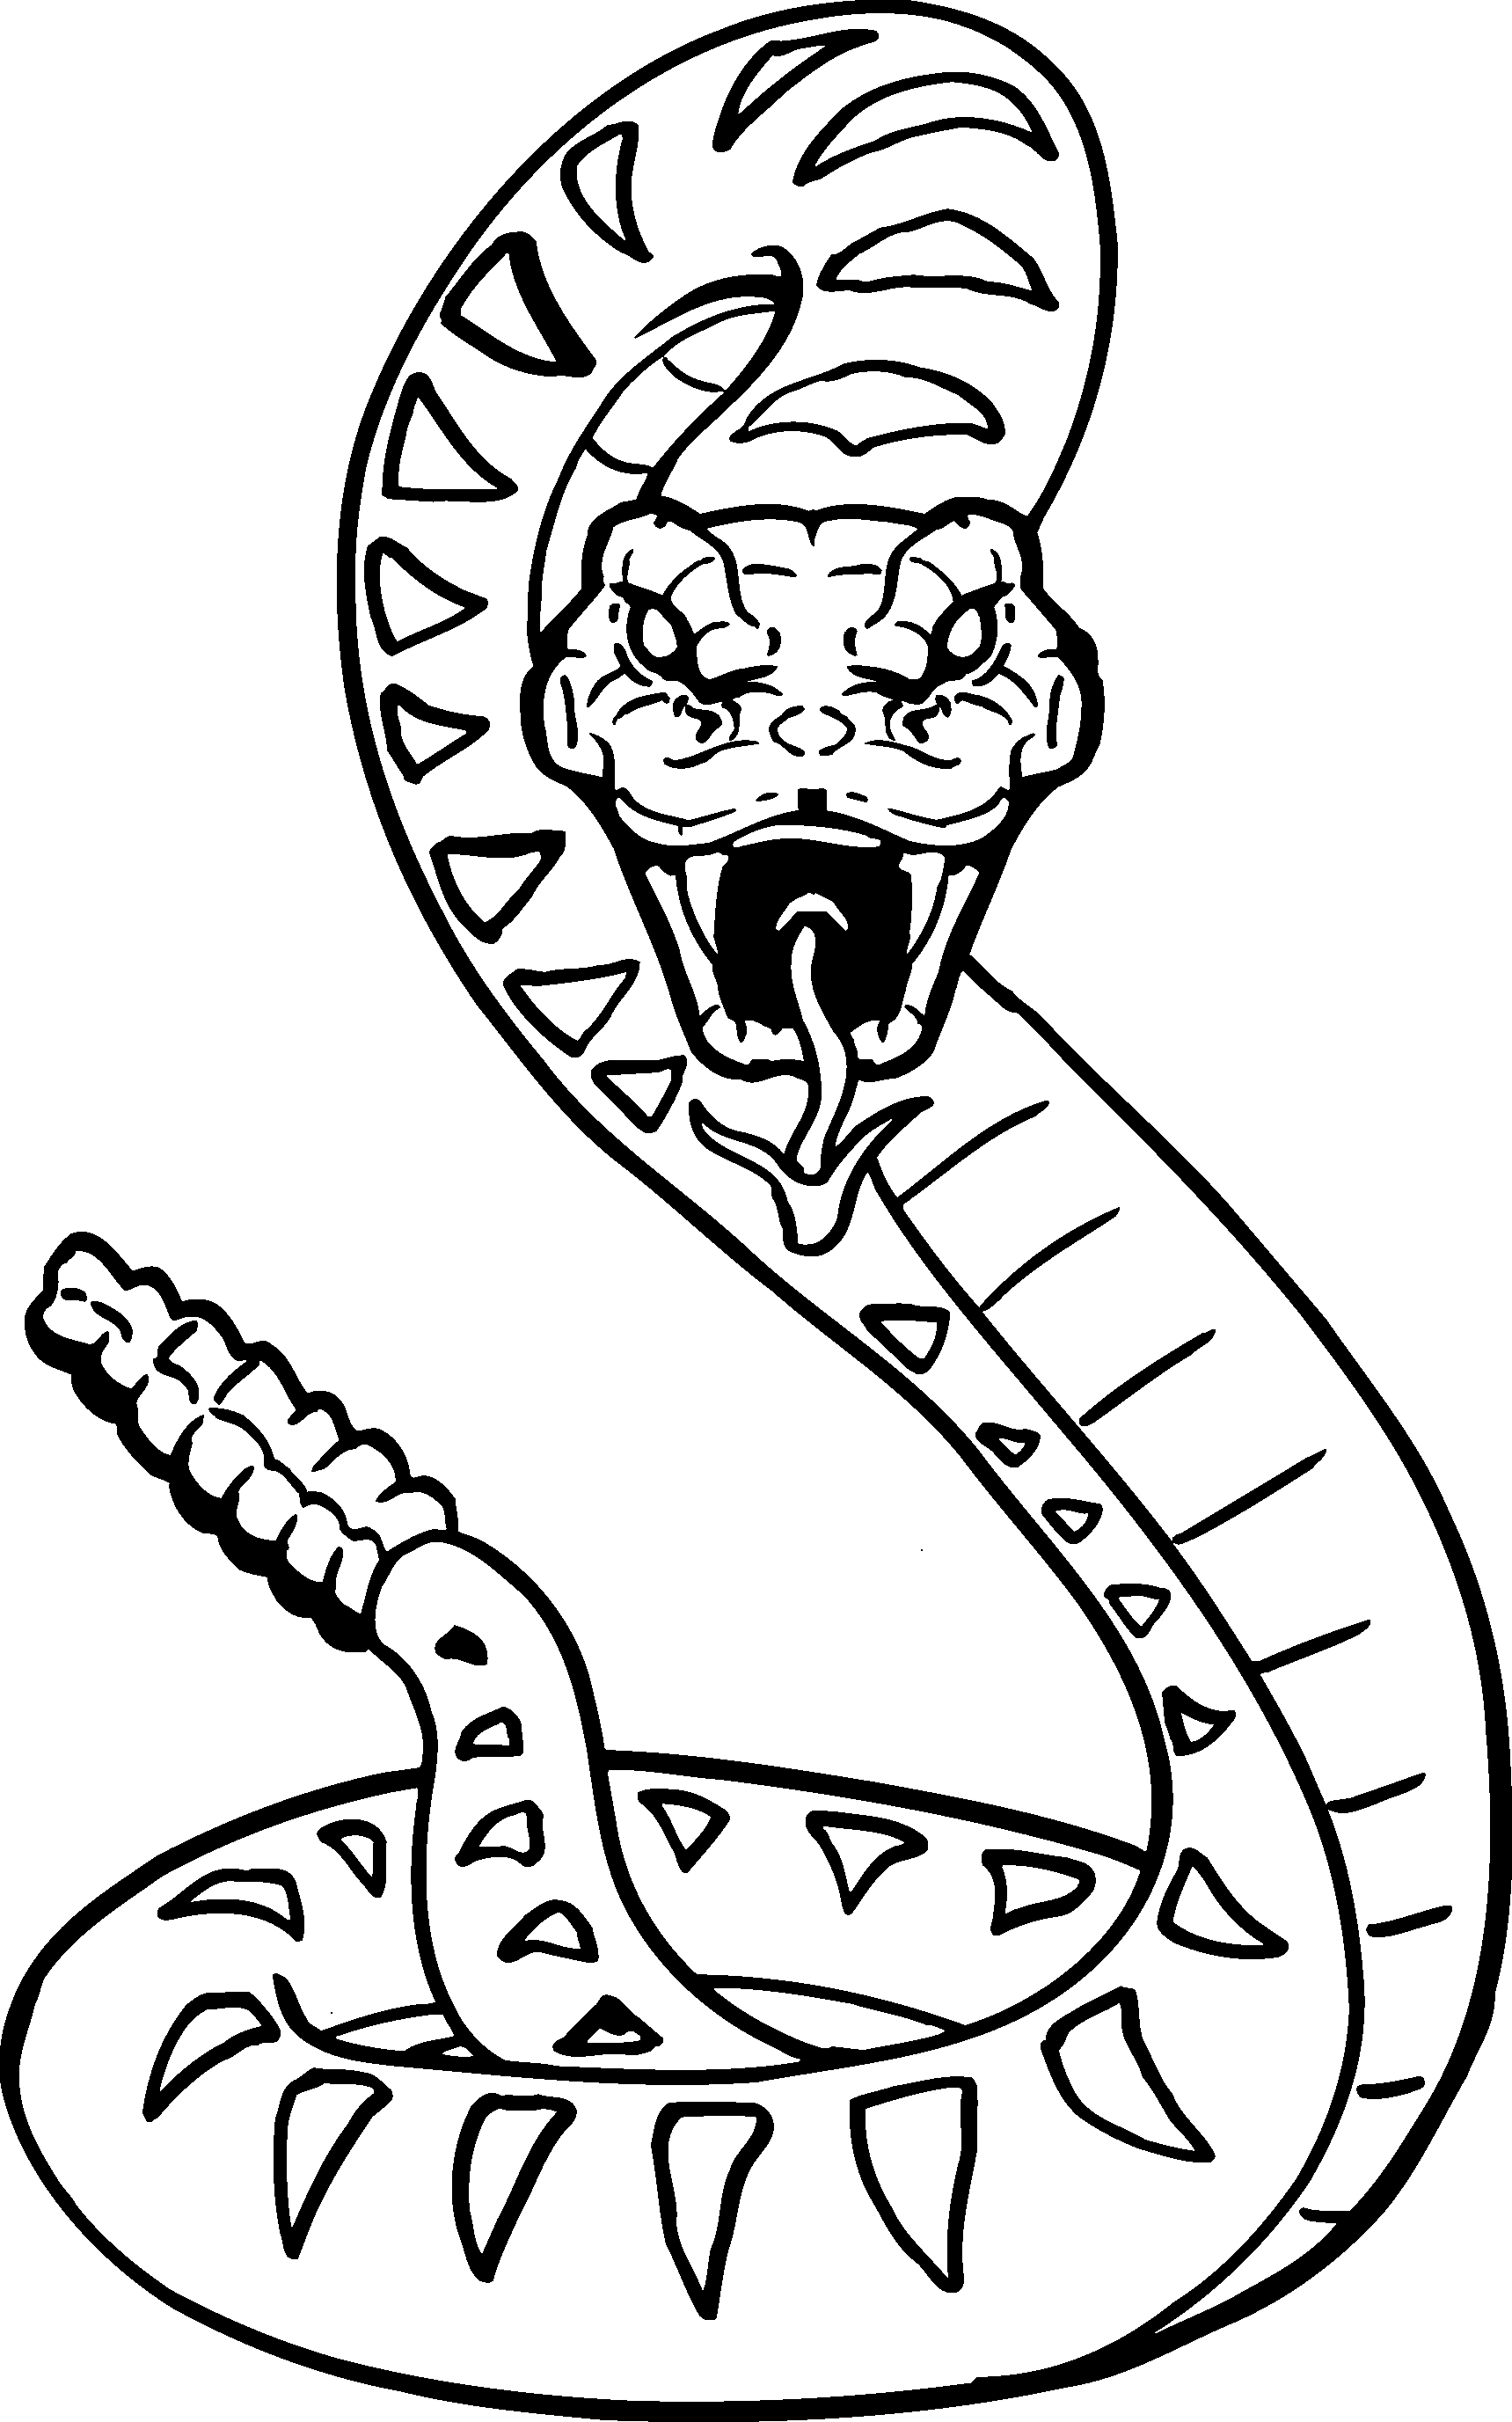 Free Snake Drawing, Download Free Clip Art, Free Clip Art on